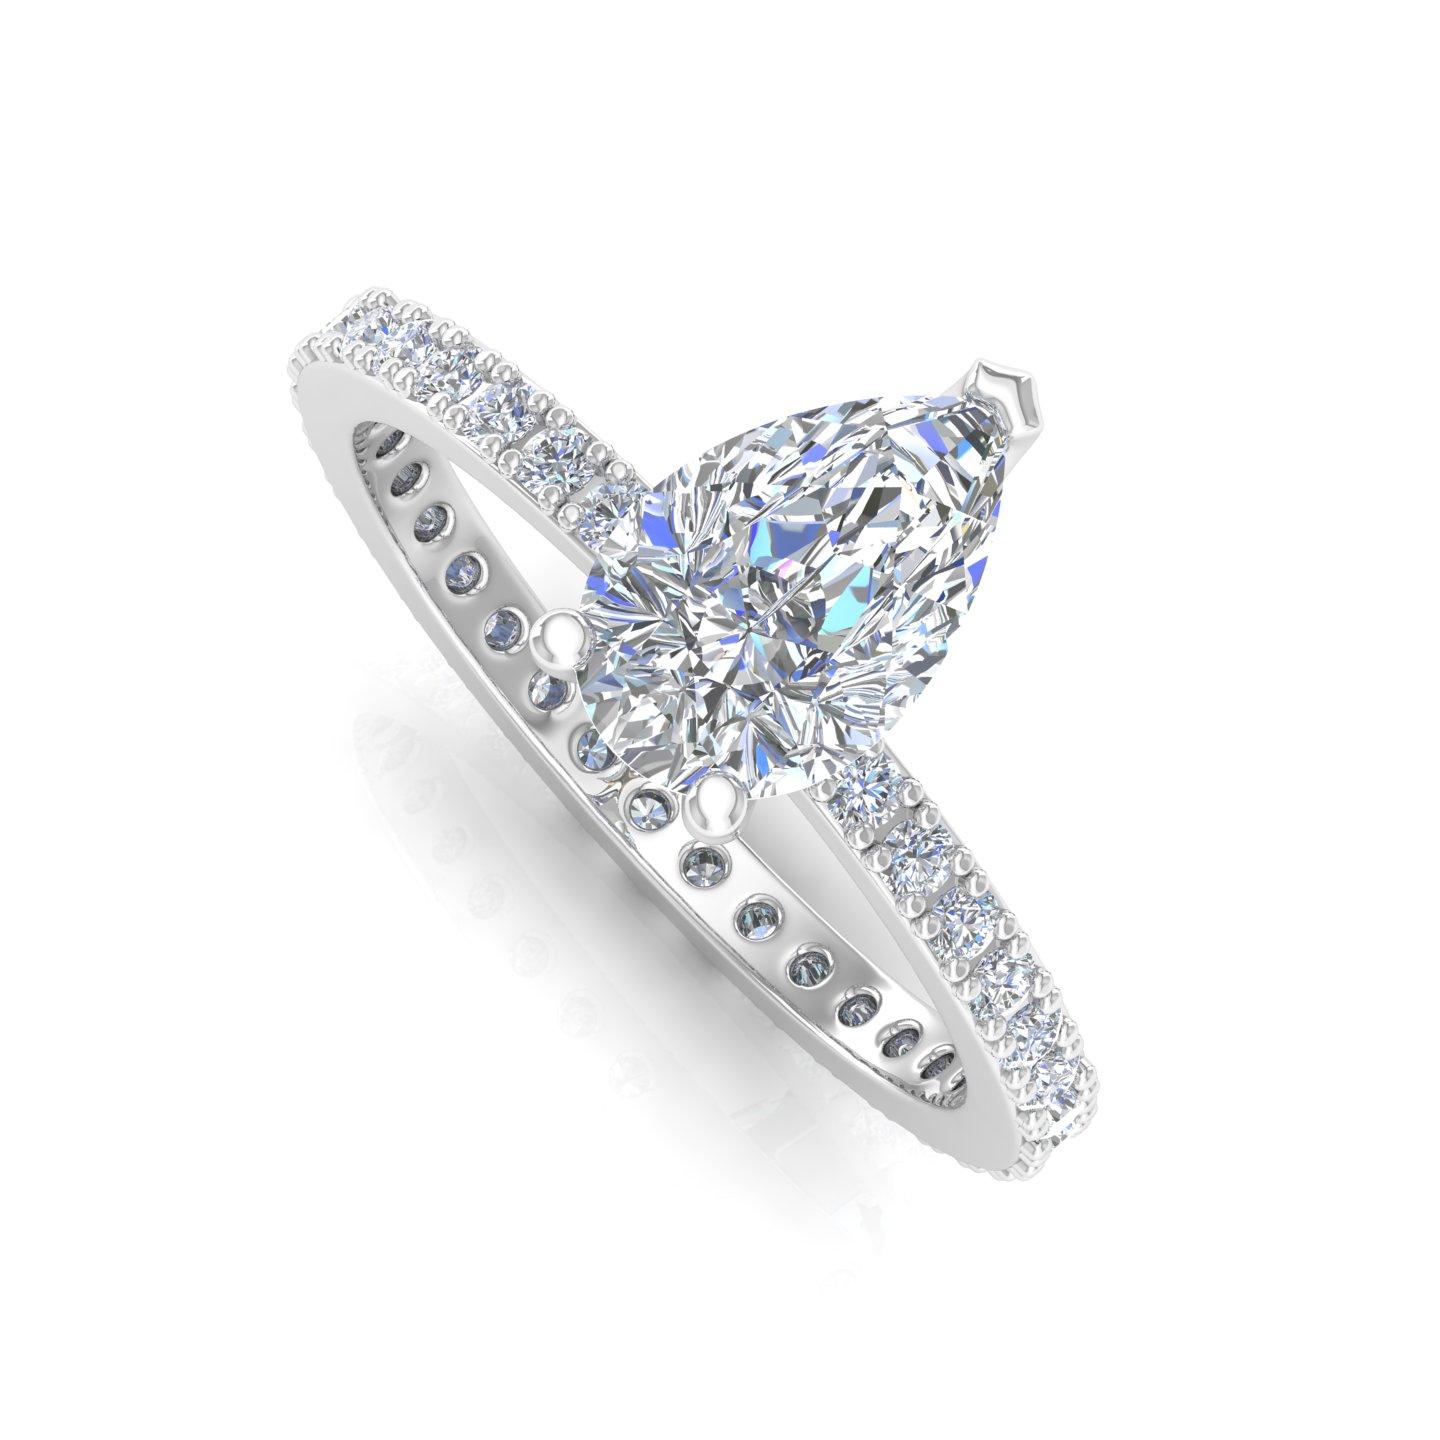 At the heart of this captivating piece rests a dazzling pear-cut diamond, renowned for its unique and graceful silhouette. The diamond boasts impeccable clarity, revealing the mesmerizing brilliance of each facet. Its pristine sparkle is further